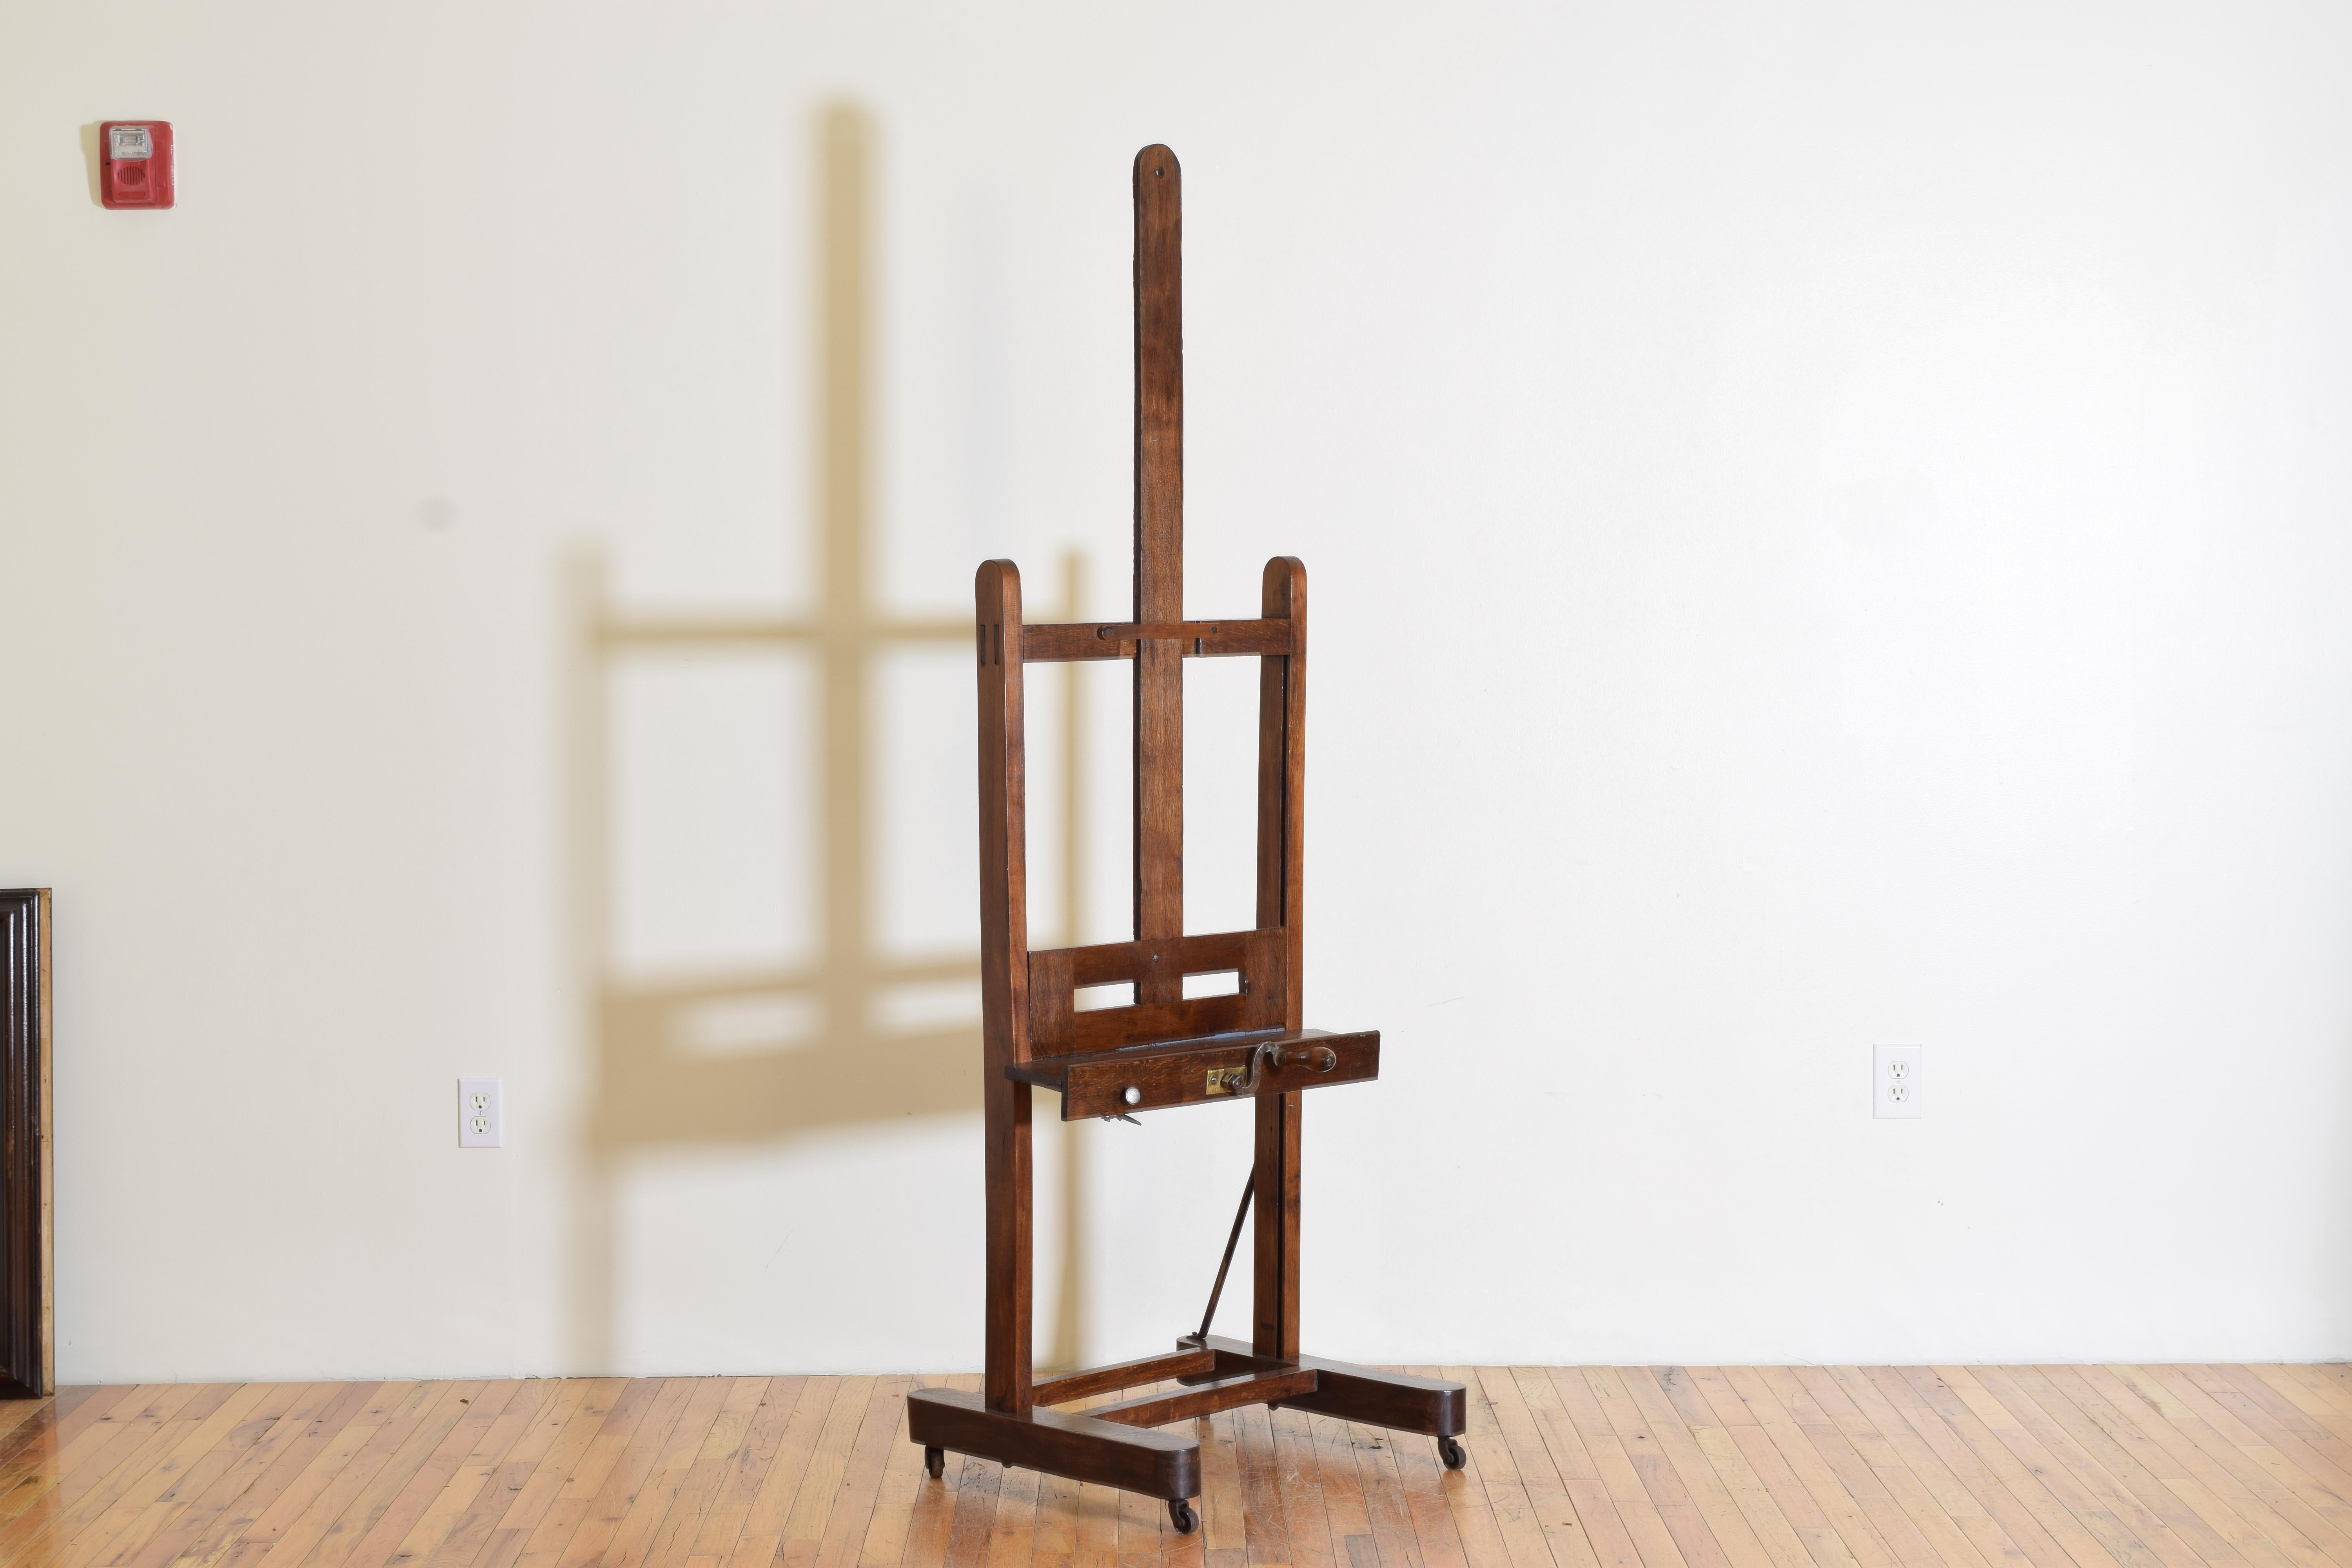 Height listed as shown in photographs but the easel is adjustable both up and down, having a tray to secure the canvas, original wooden crank handle, and casters at base, lacking one iron support rod.